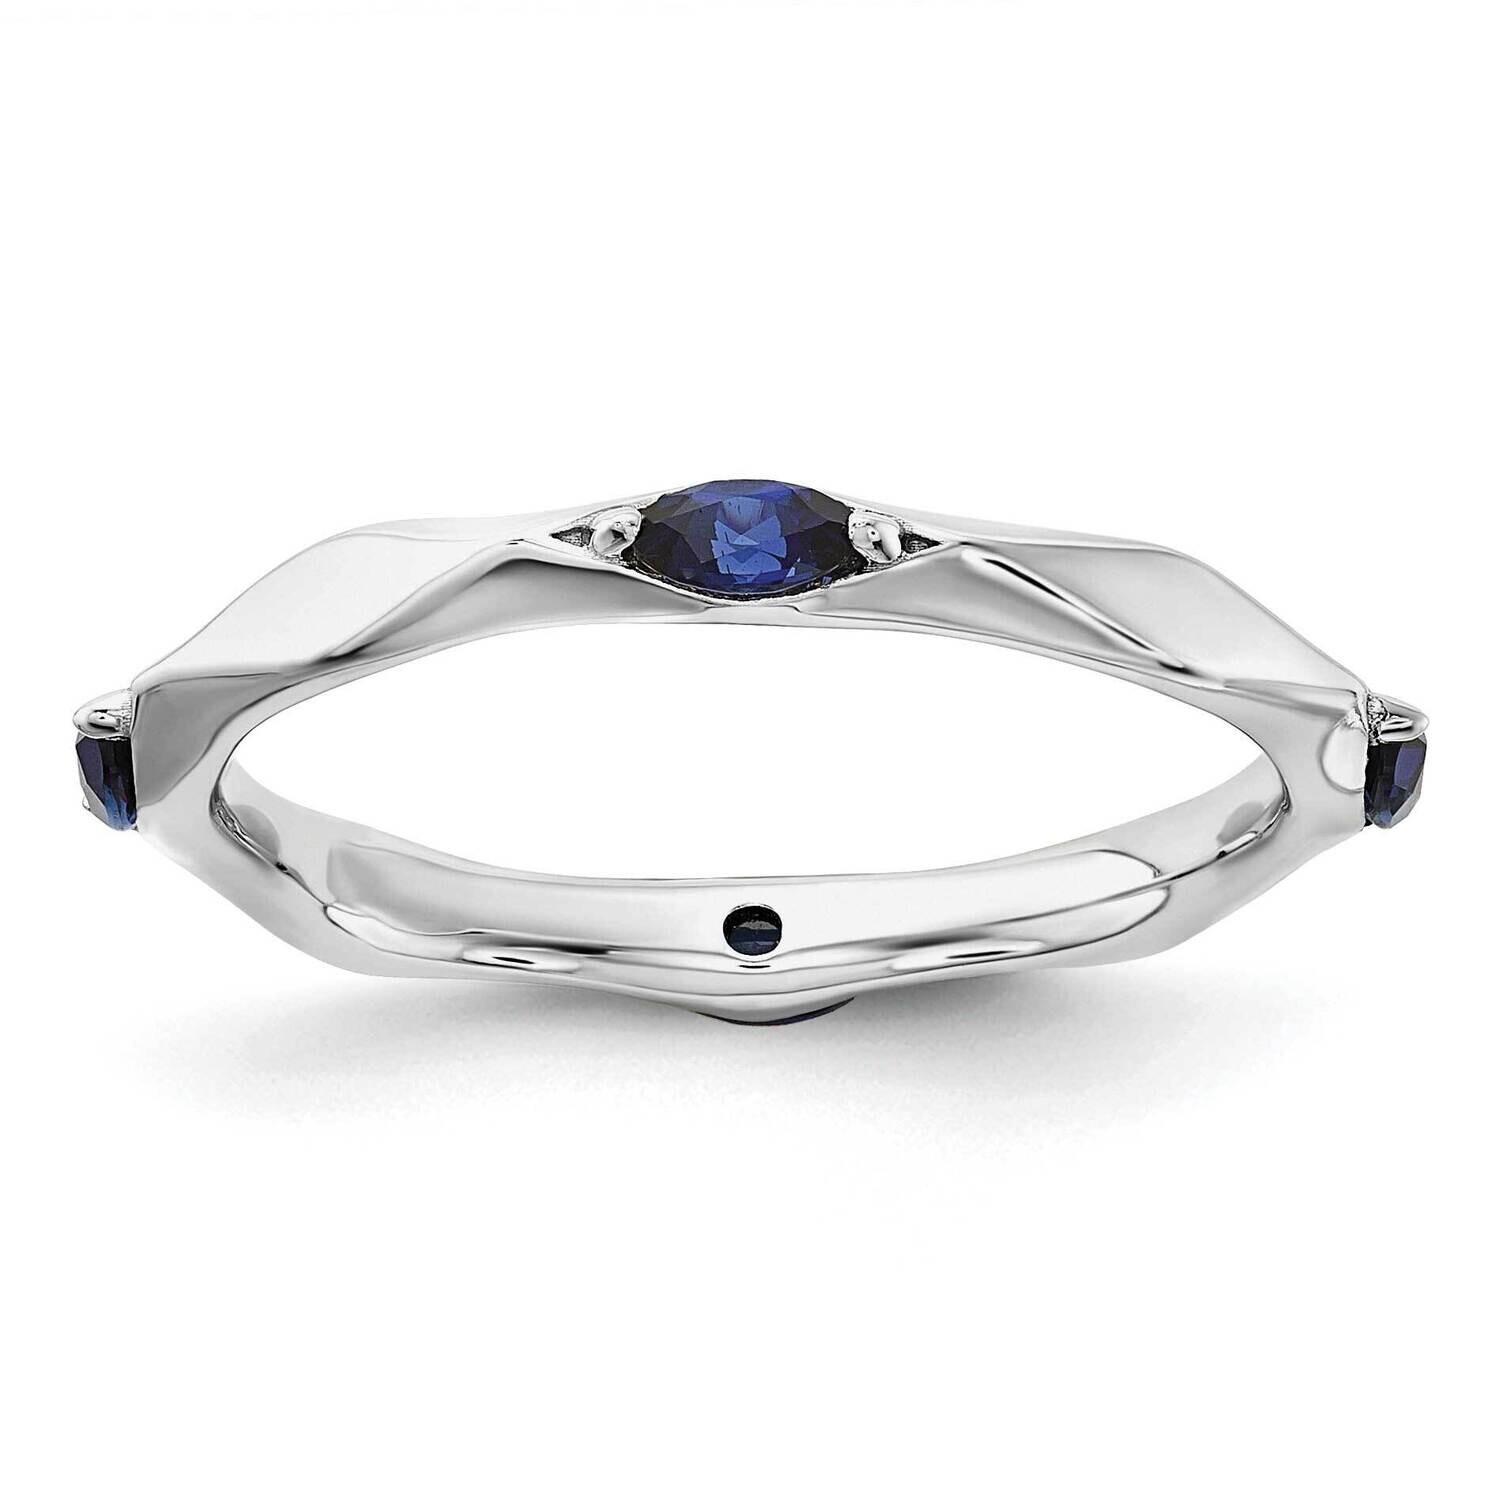 Stackable Expressions Rhod-Plated Created Sapphire Ring Sterling Silver QSK2236